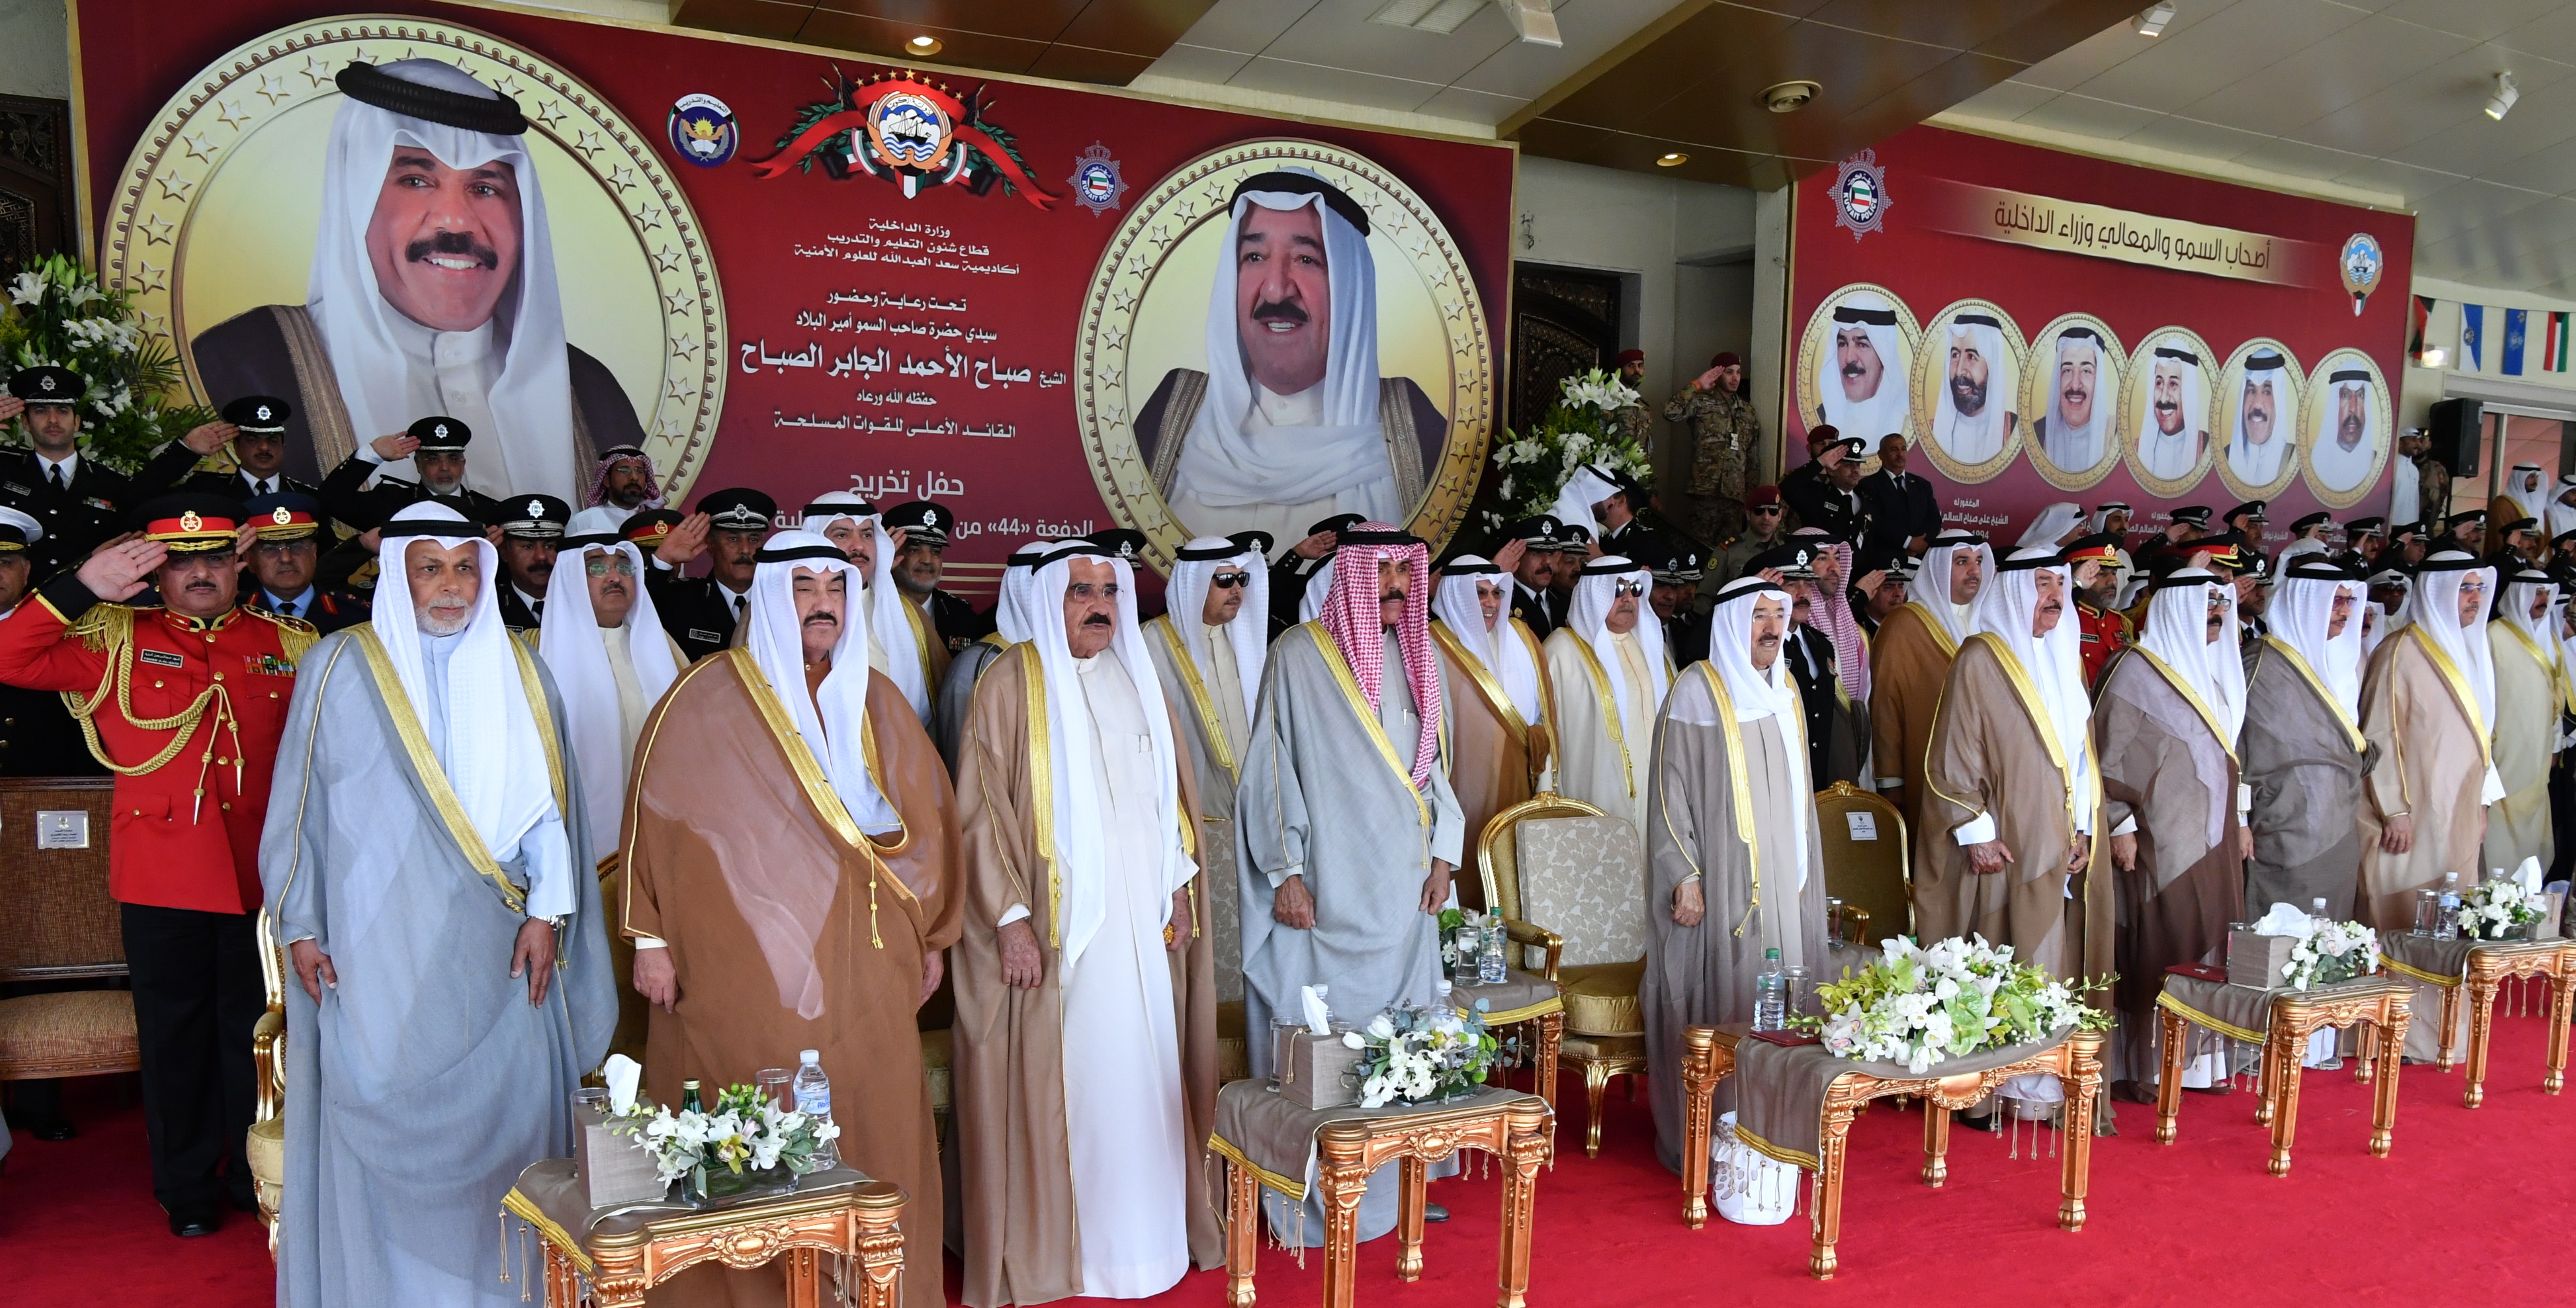 The ceremony began with the presence of His Highness the Amir, His Highness the Crown Prince Sheikh Nawaf Al-Ahmad Al-Jaber Al-Sabah, His Highness the Prime Minister Sheikh Jaber Al-Mubarak Al-Hamad Al-Sabah, officials from the constitutional court, 